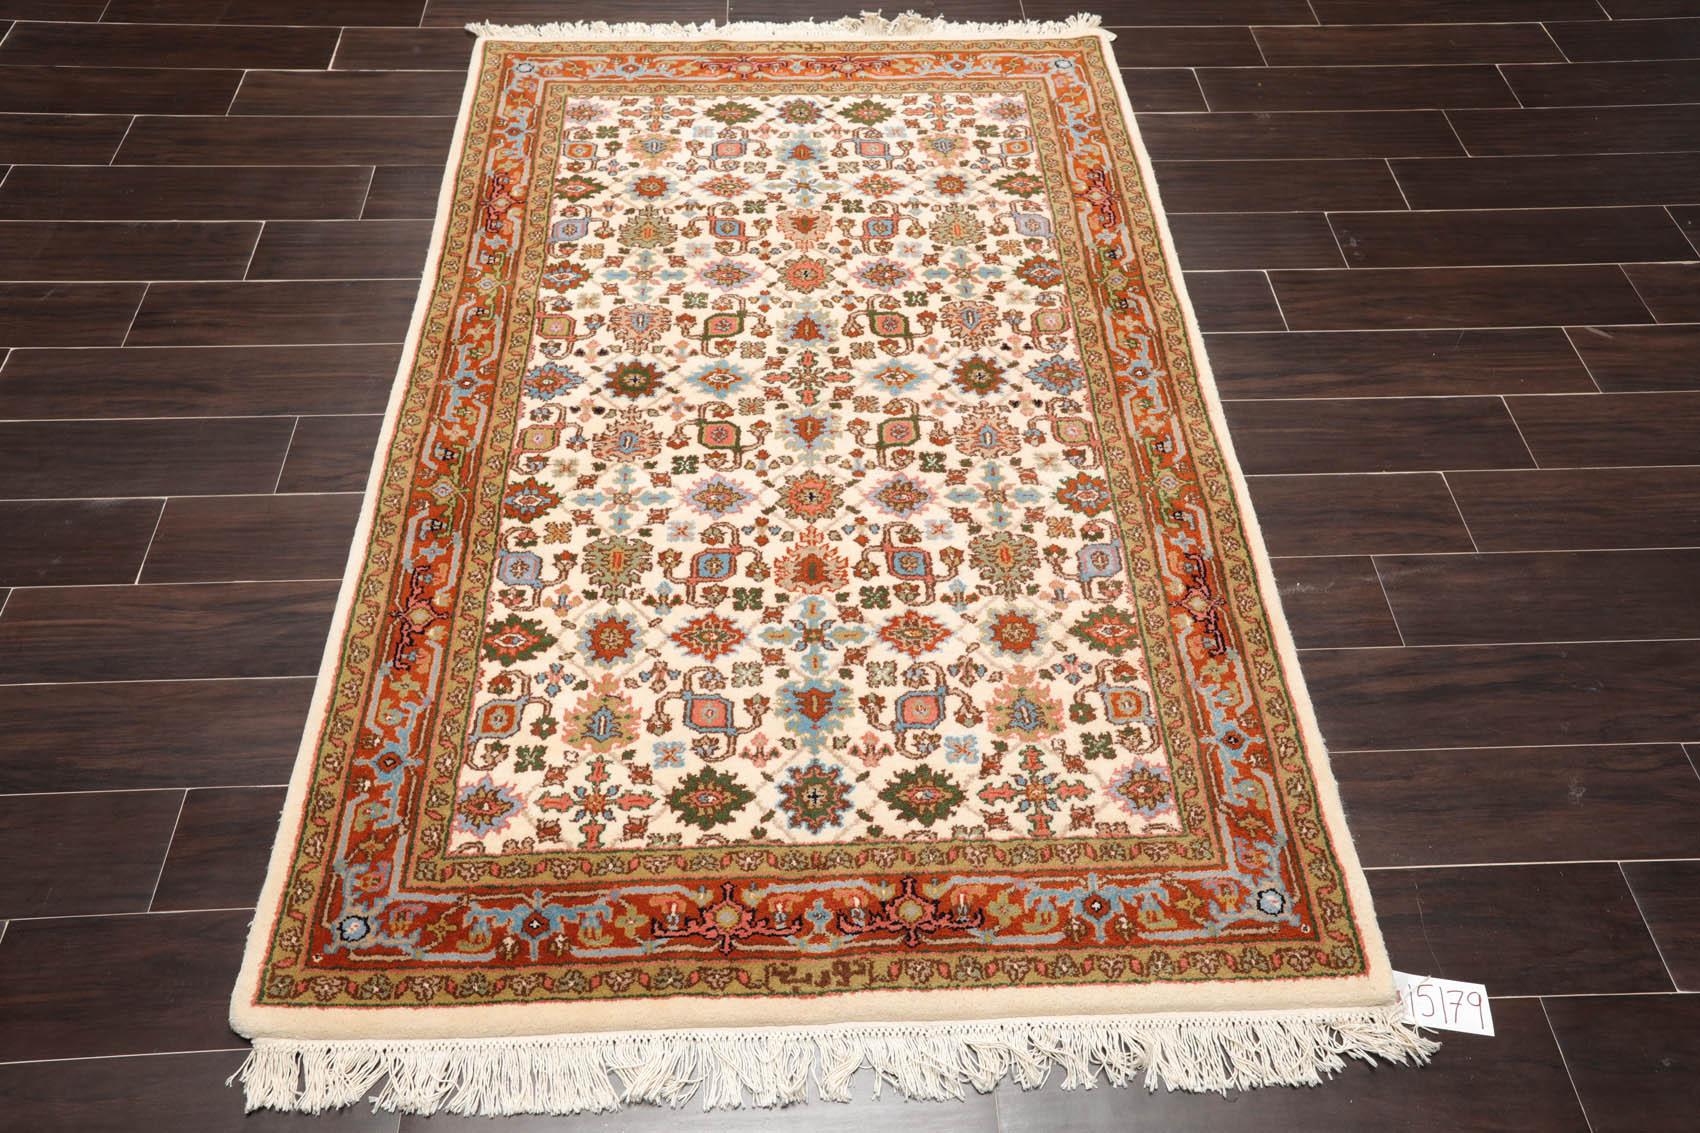 Entry Rug, Hand Knotted 4x6 Beige Persian Isfahan Entry Rug